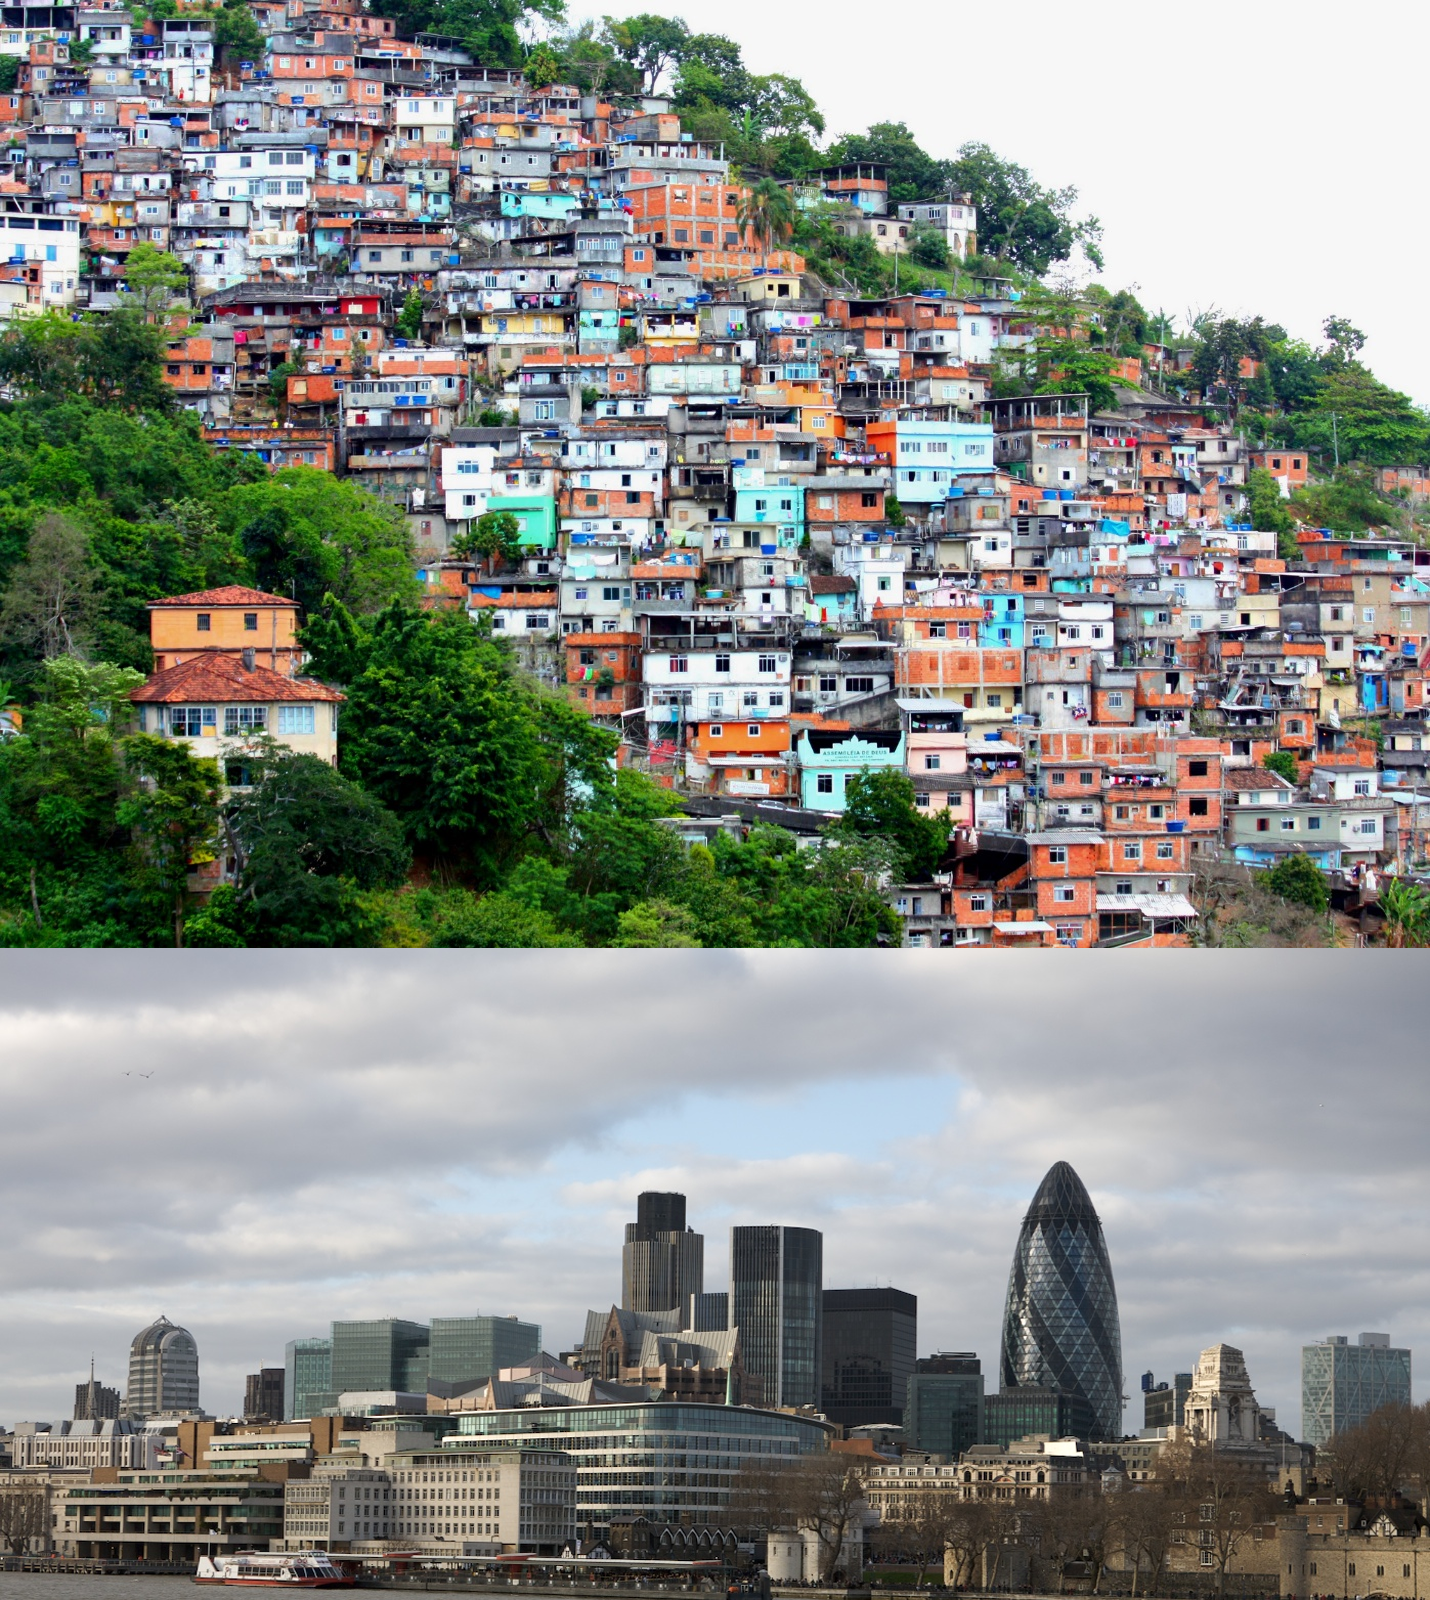 Small houses built closely together in Rio de Janeiro and high rise buildings in London